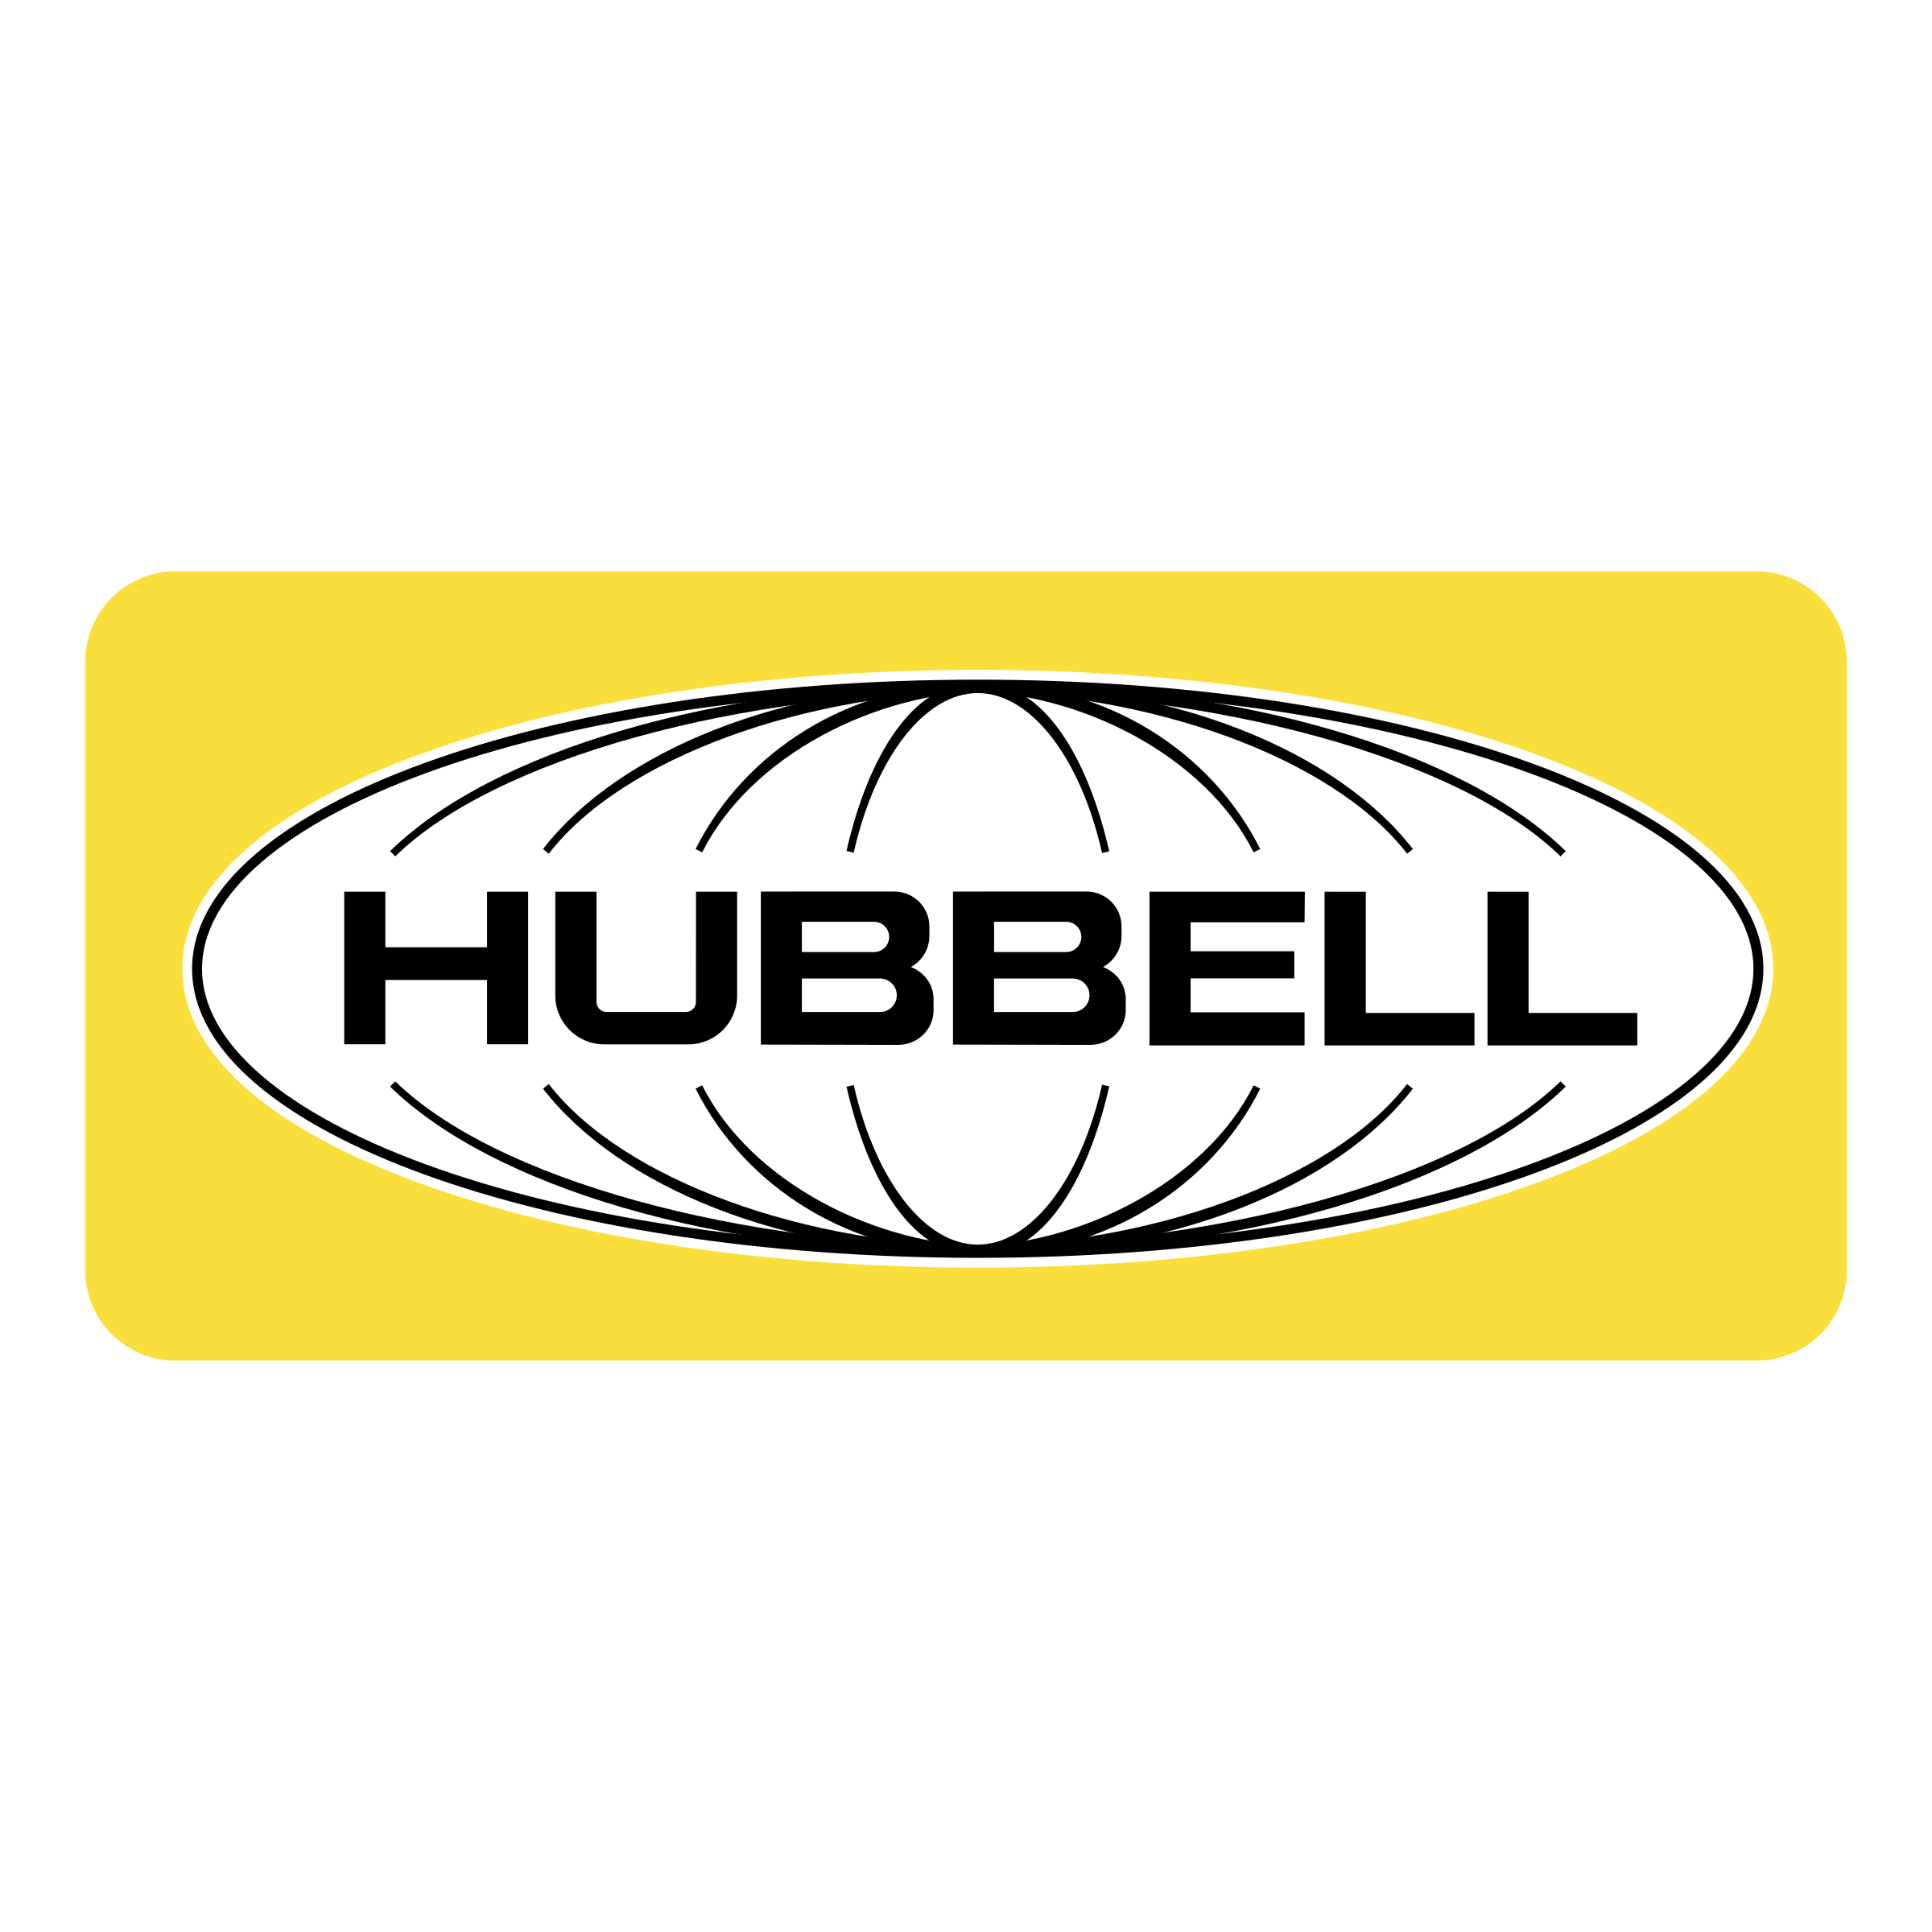 Hubbell Logo - Hubbell Logo PNG Transparent & SVG Vector - Freebie Supply